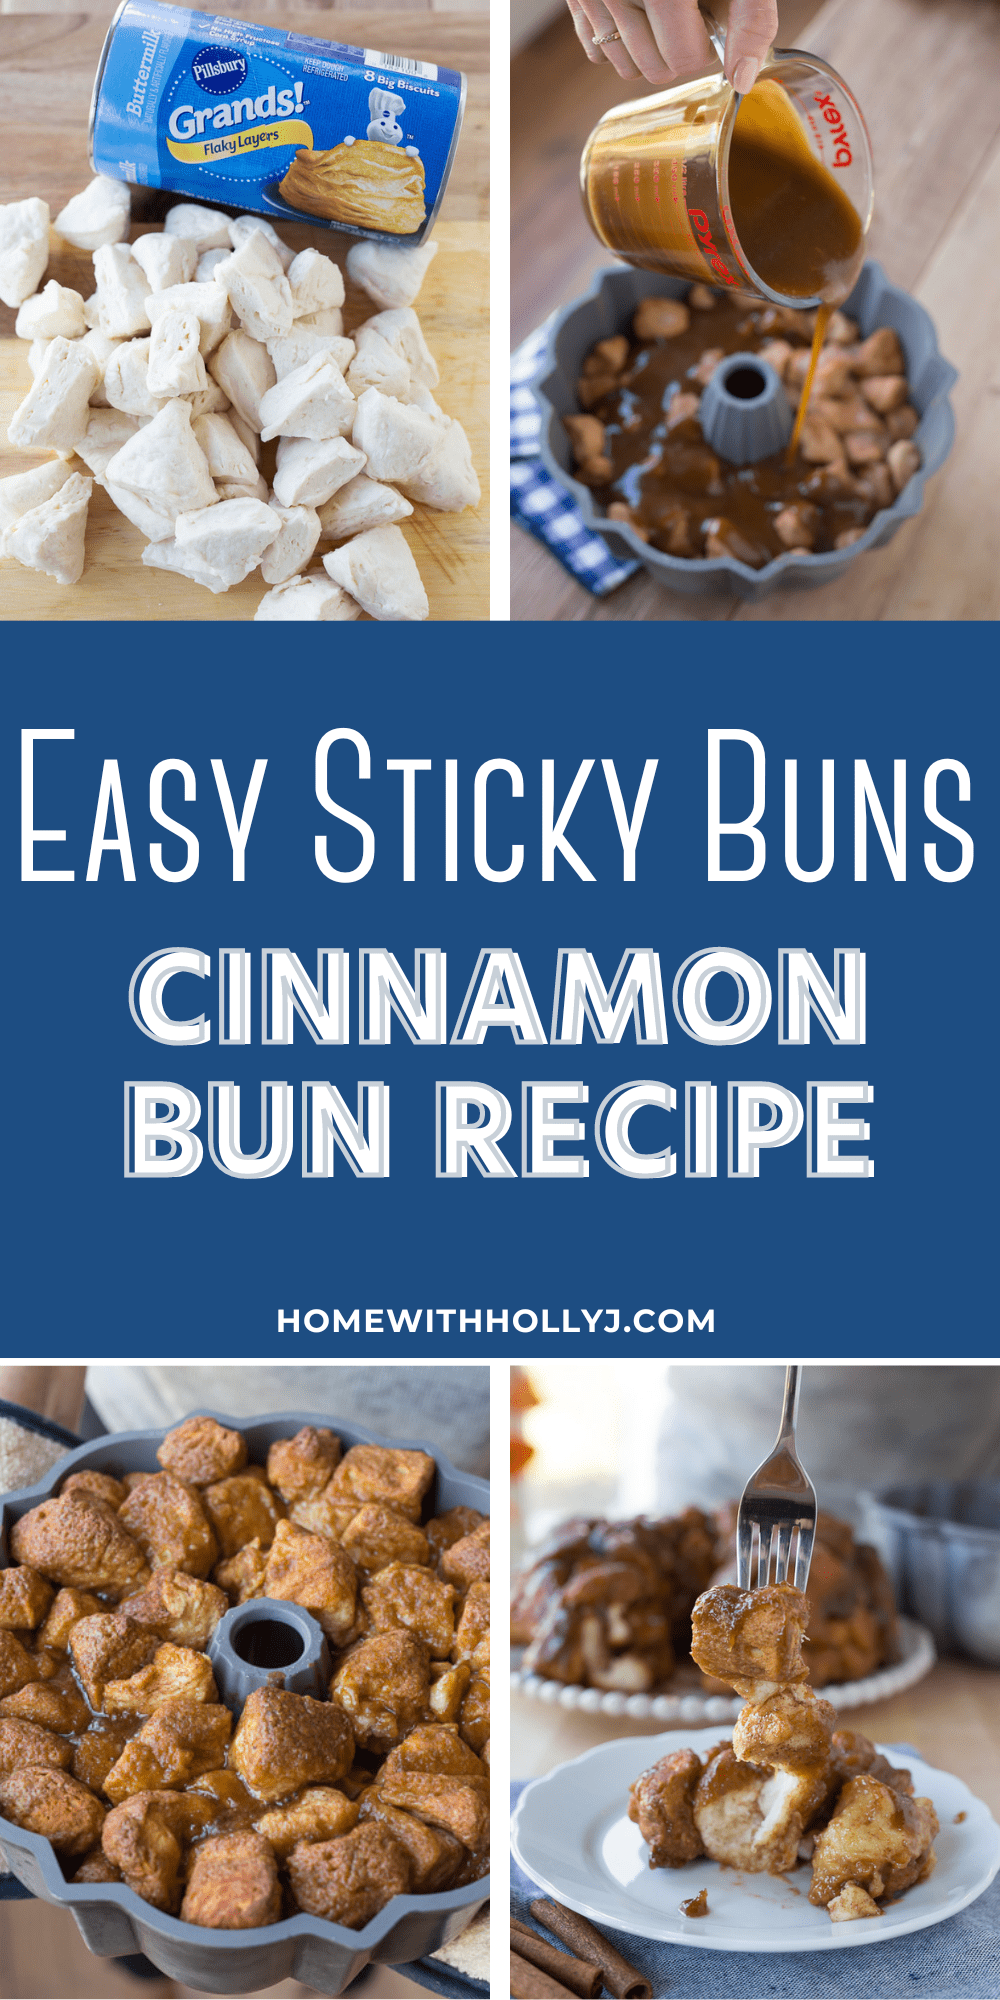 With this childhood favorite easy sticky buns recipe, you'll have your homemade cinnamon buns ready to go. Learn more here.